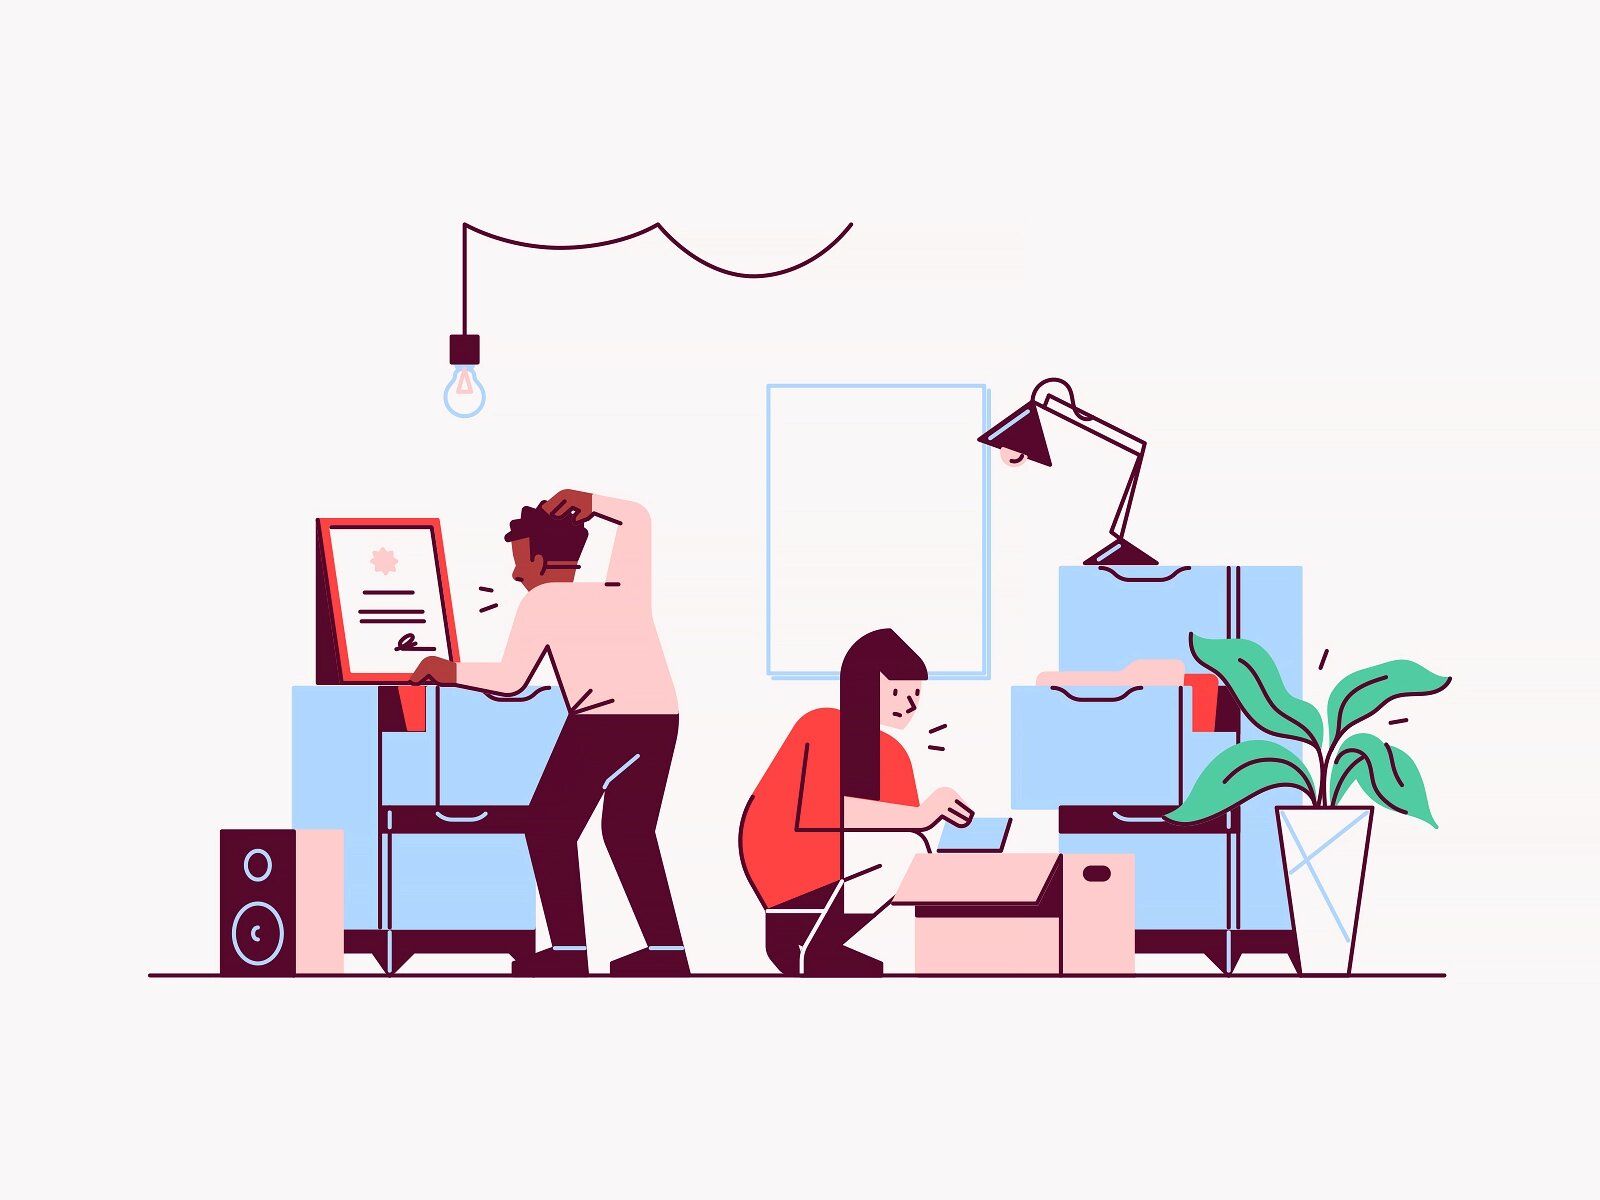 Setting up an easy-accessible documentation system plays a key role in overall patient’s and doctor’s convenience (*image by [Julian Burford](https://dribbble.com/JulianBurford){ rel="nofollow" target="_blank" .default-md}*)